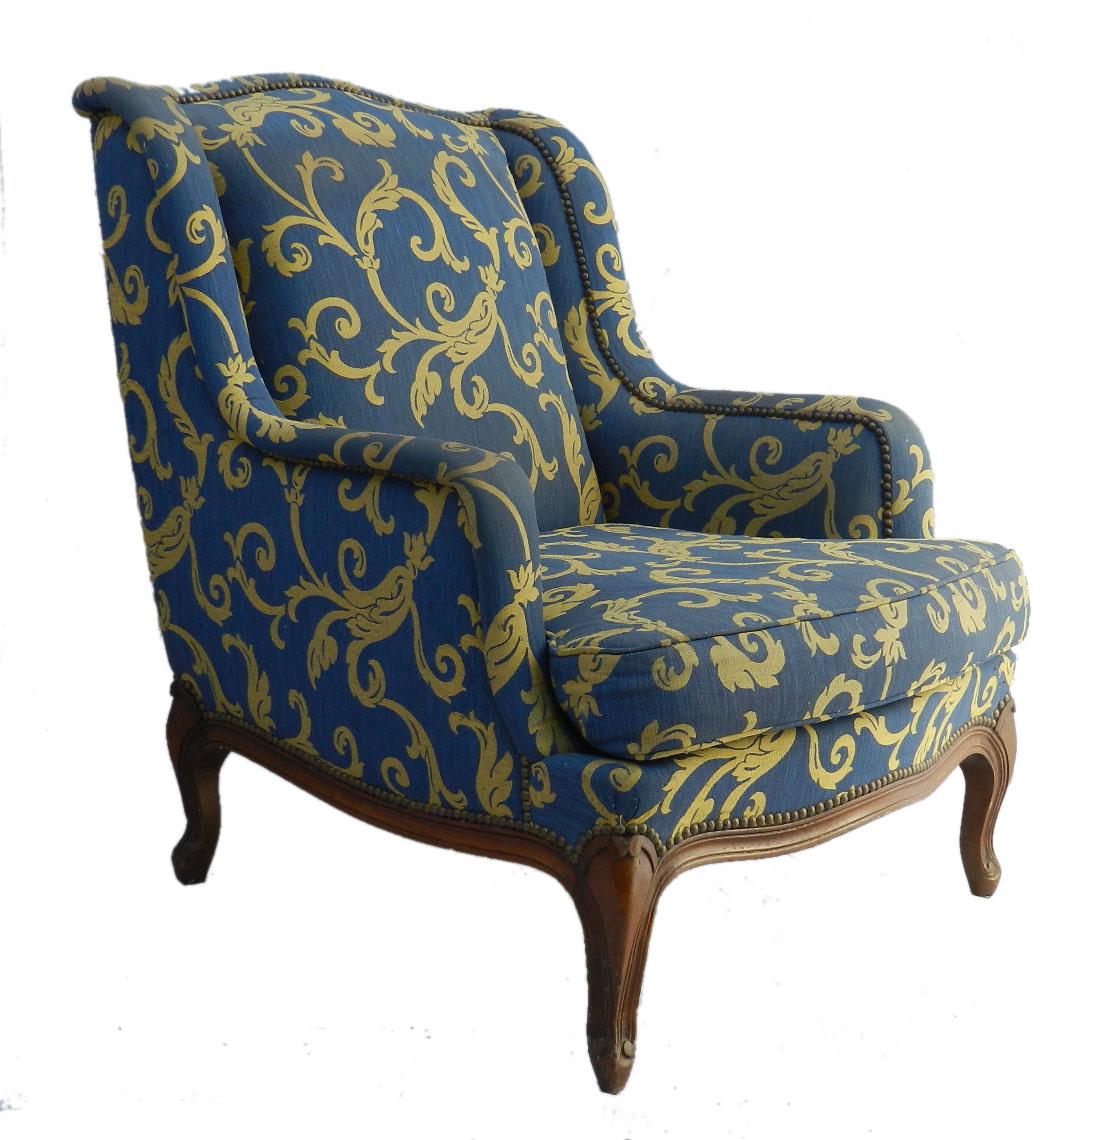 Pair Louis XV style armchairs early 20th century to recover
Good shape very comfortable
Solid and sturdy
The upholstery was completely revised not long ago with good quality top covers
The covers need to be changed the fabric has threads pulled on